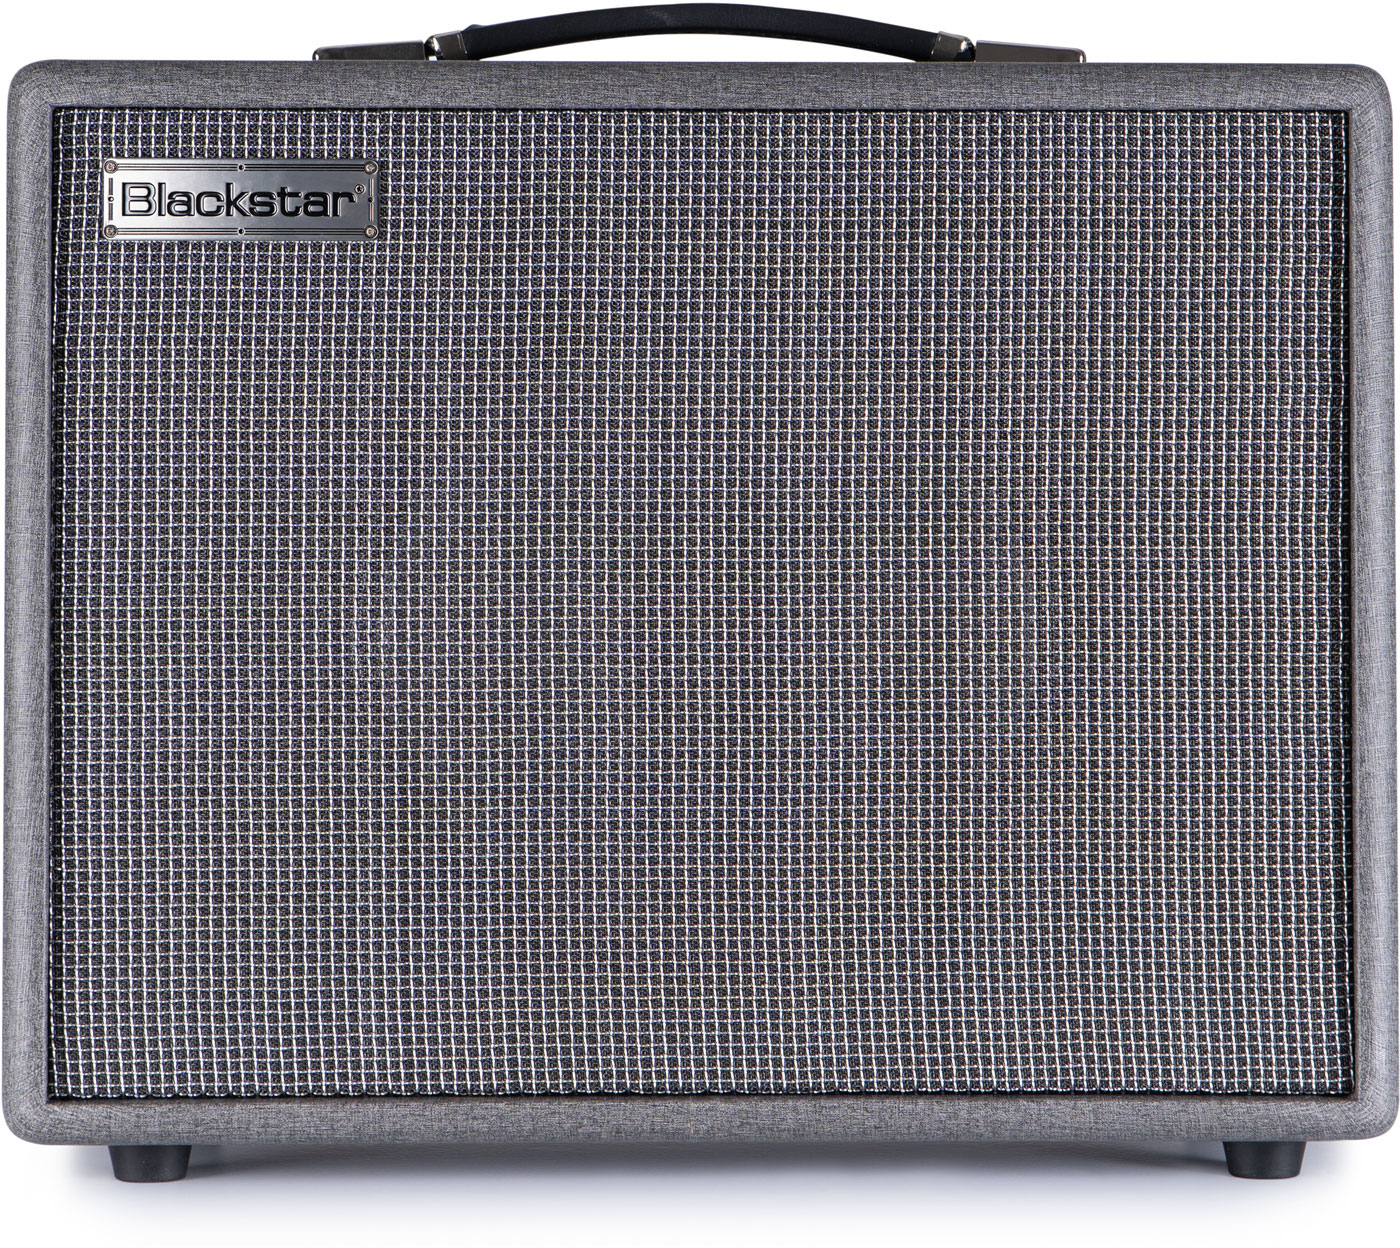 Blackstar Silverline Special 50w 1x12 - Electric guitar combo amp - Variation 1